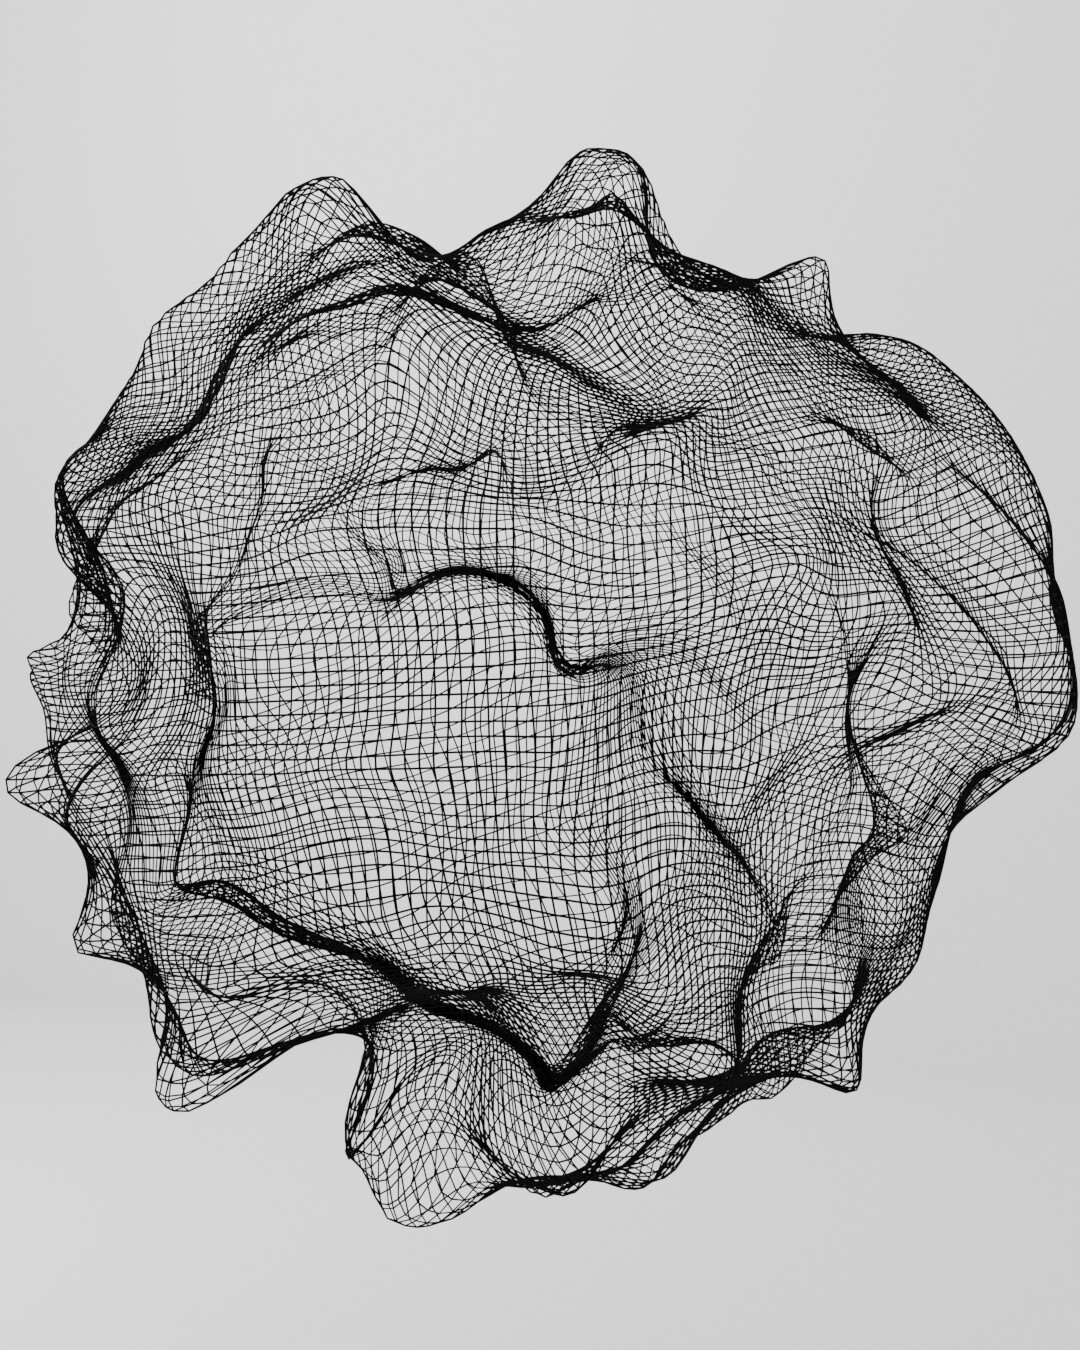 ArtStation - Abstract 3D wireframe model | Resources